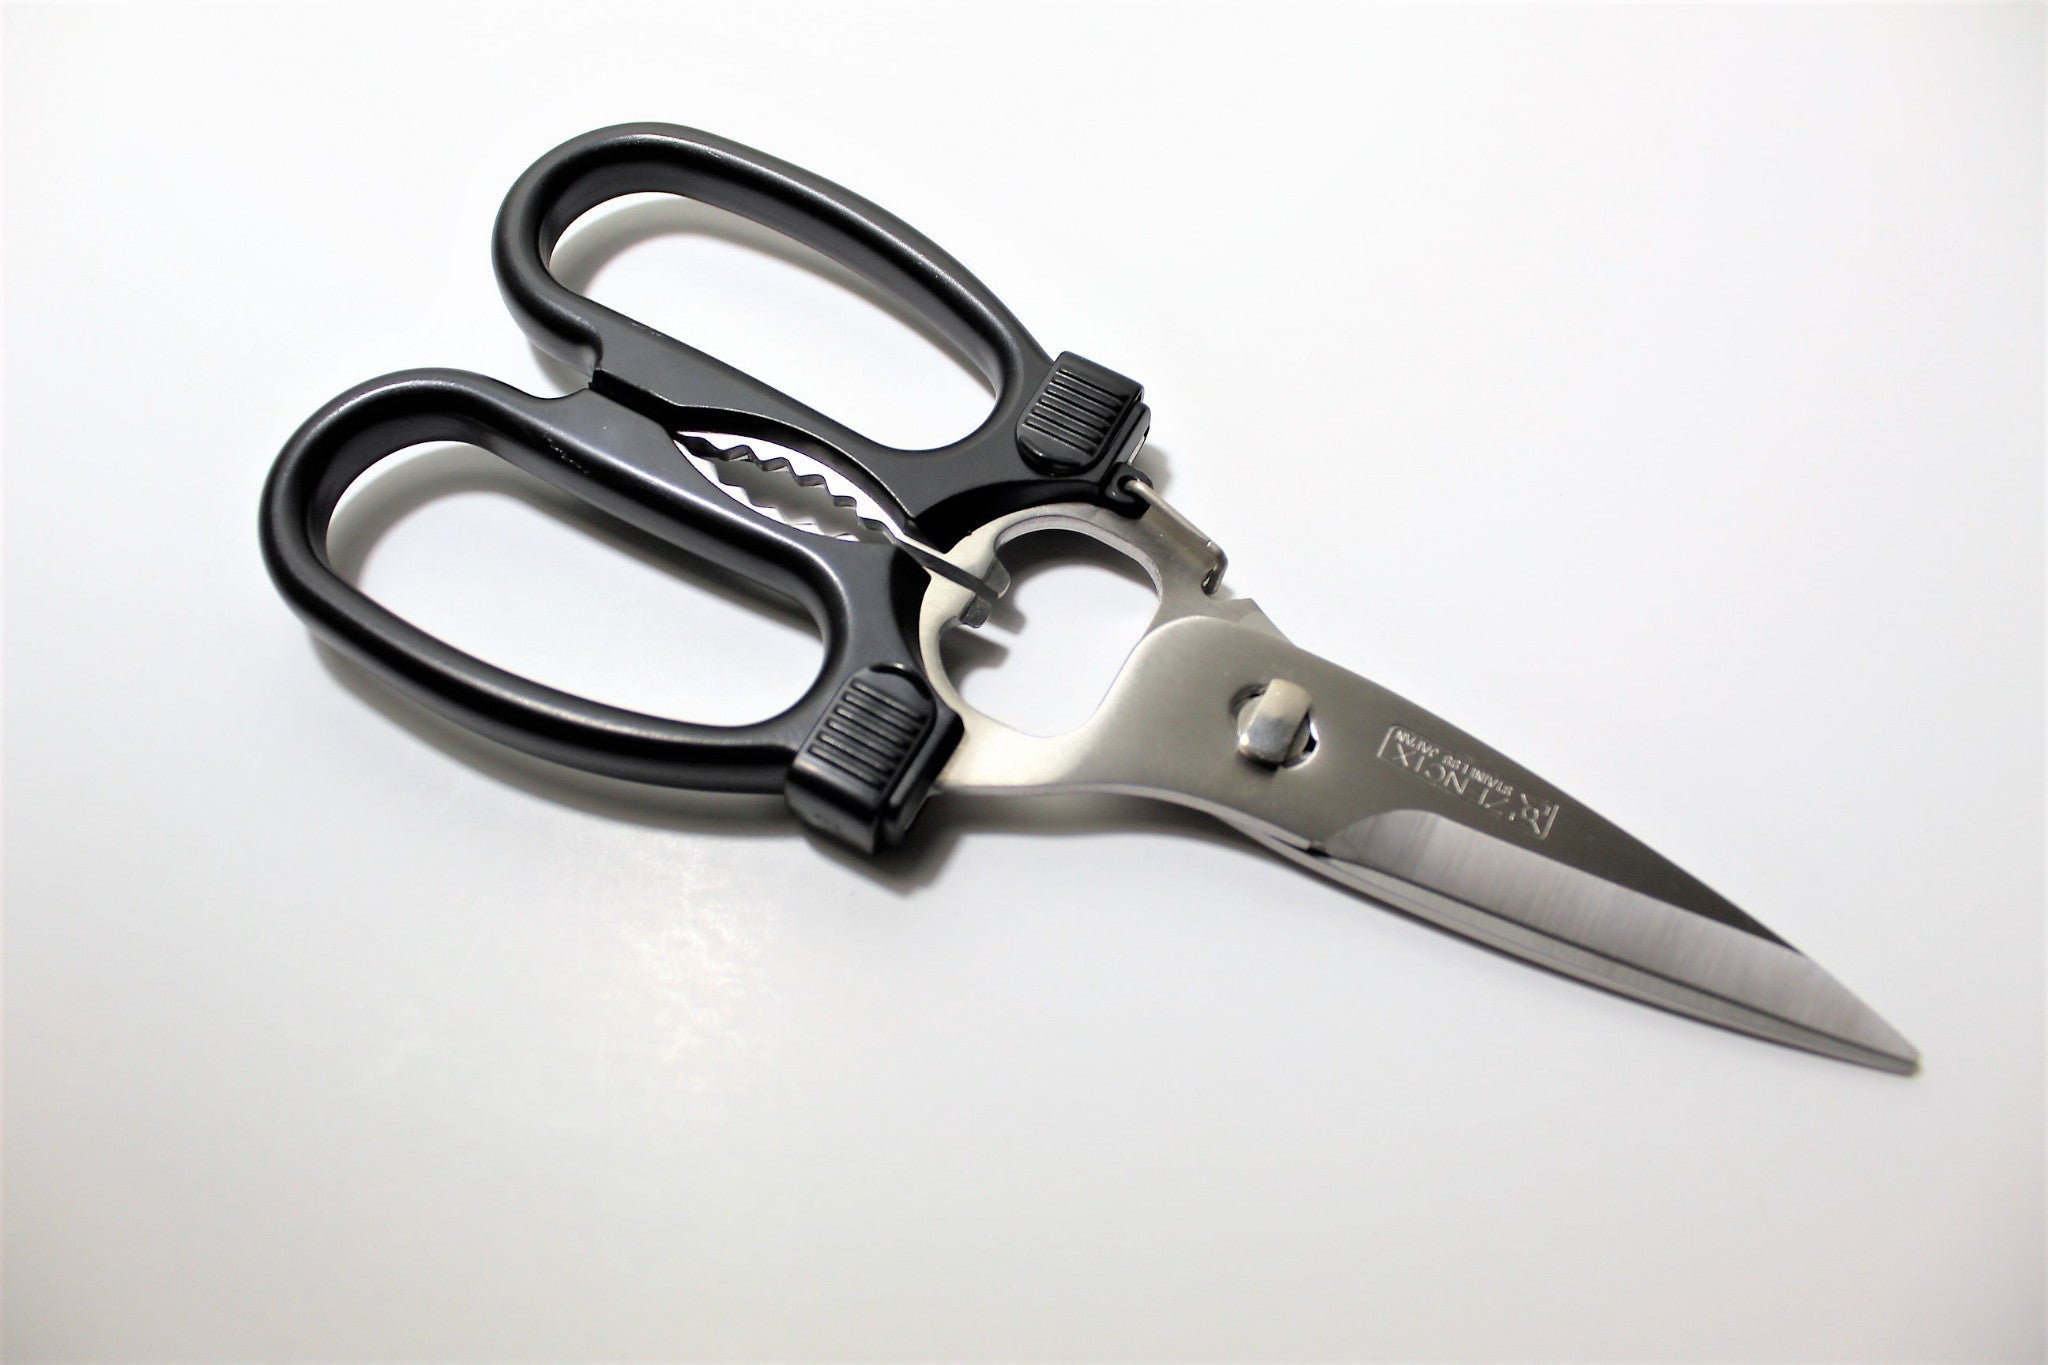 japanese stainless steel kitchen shears